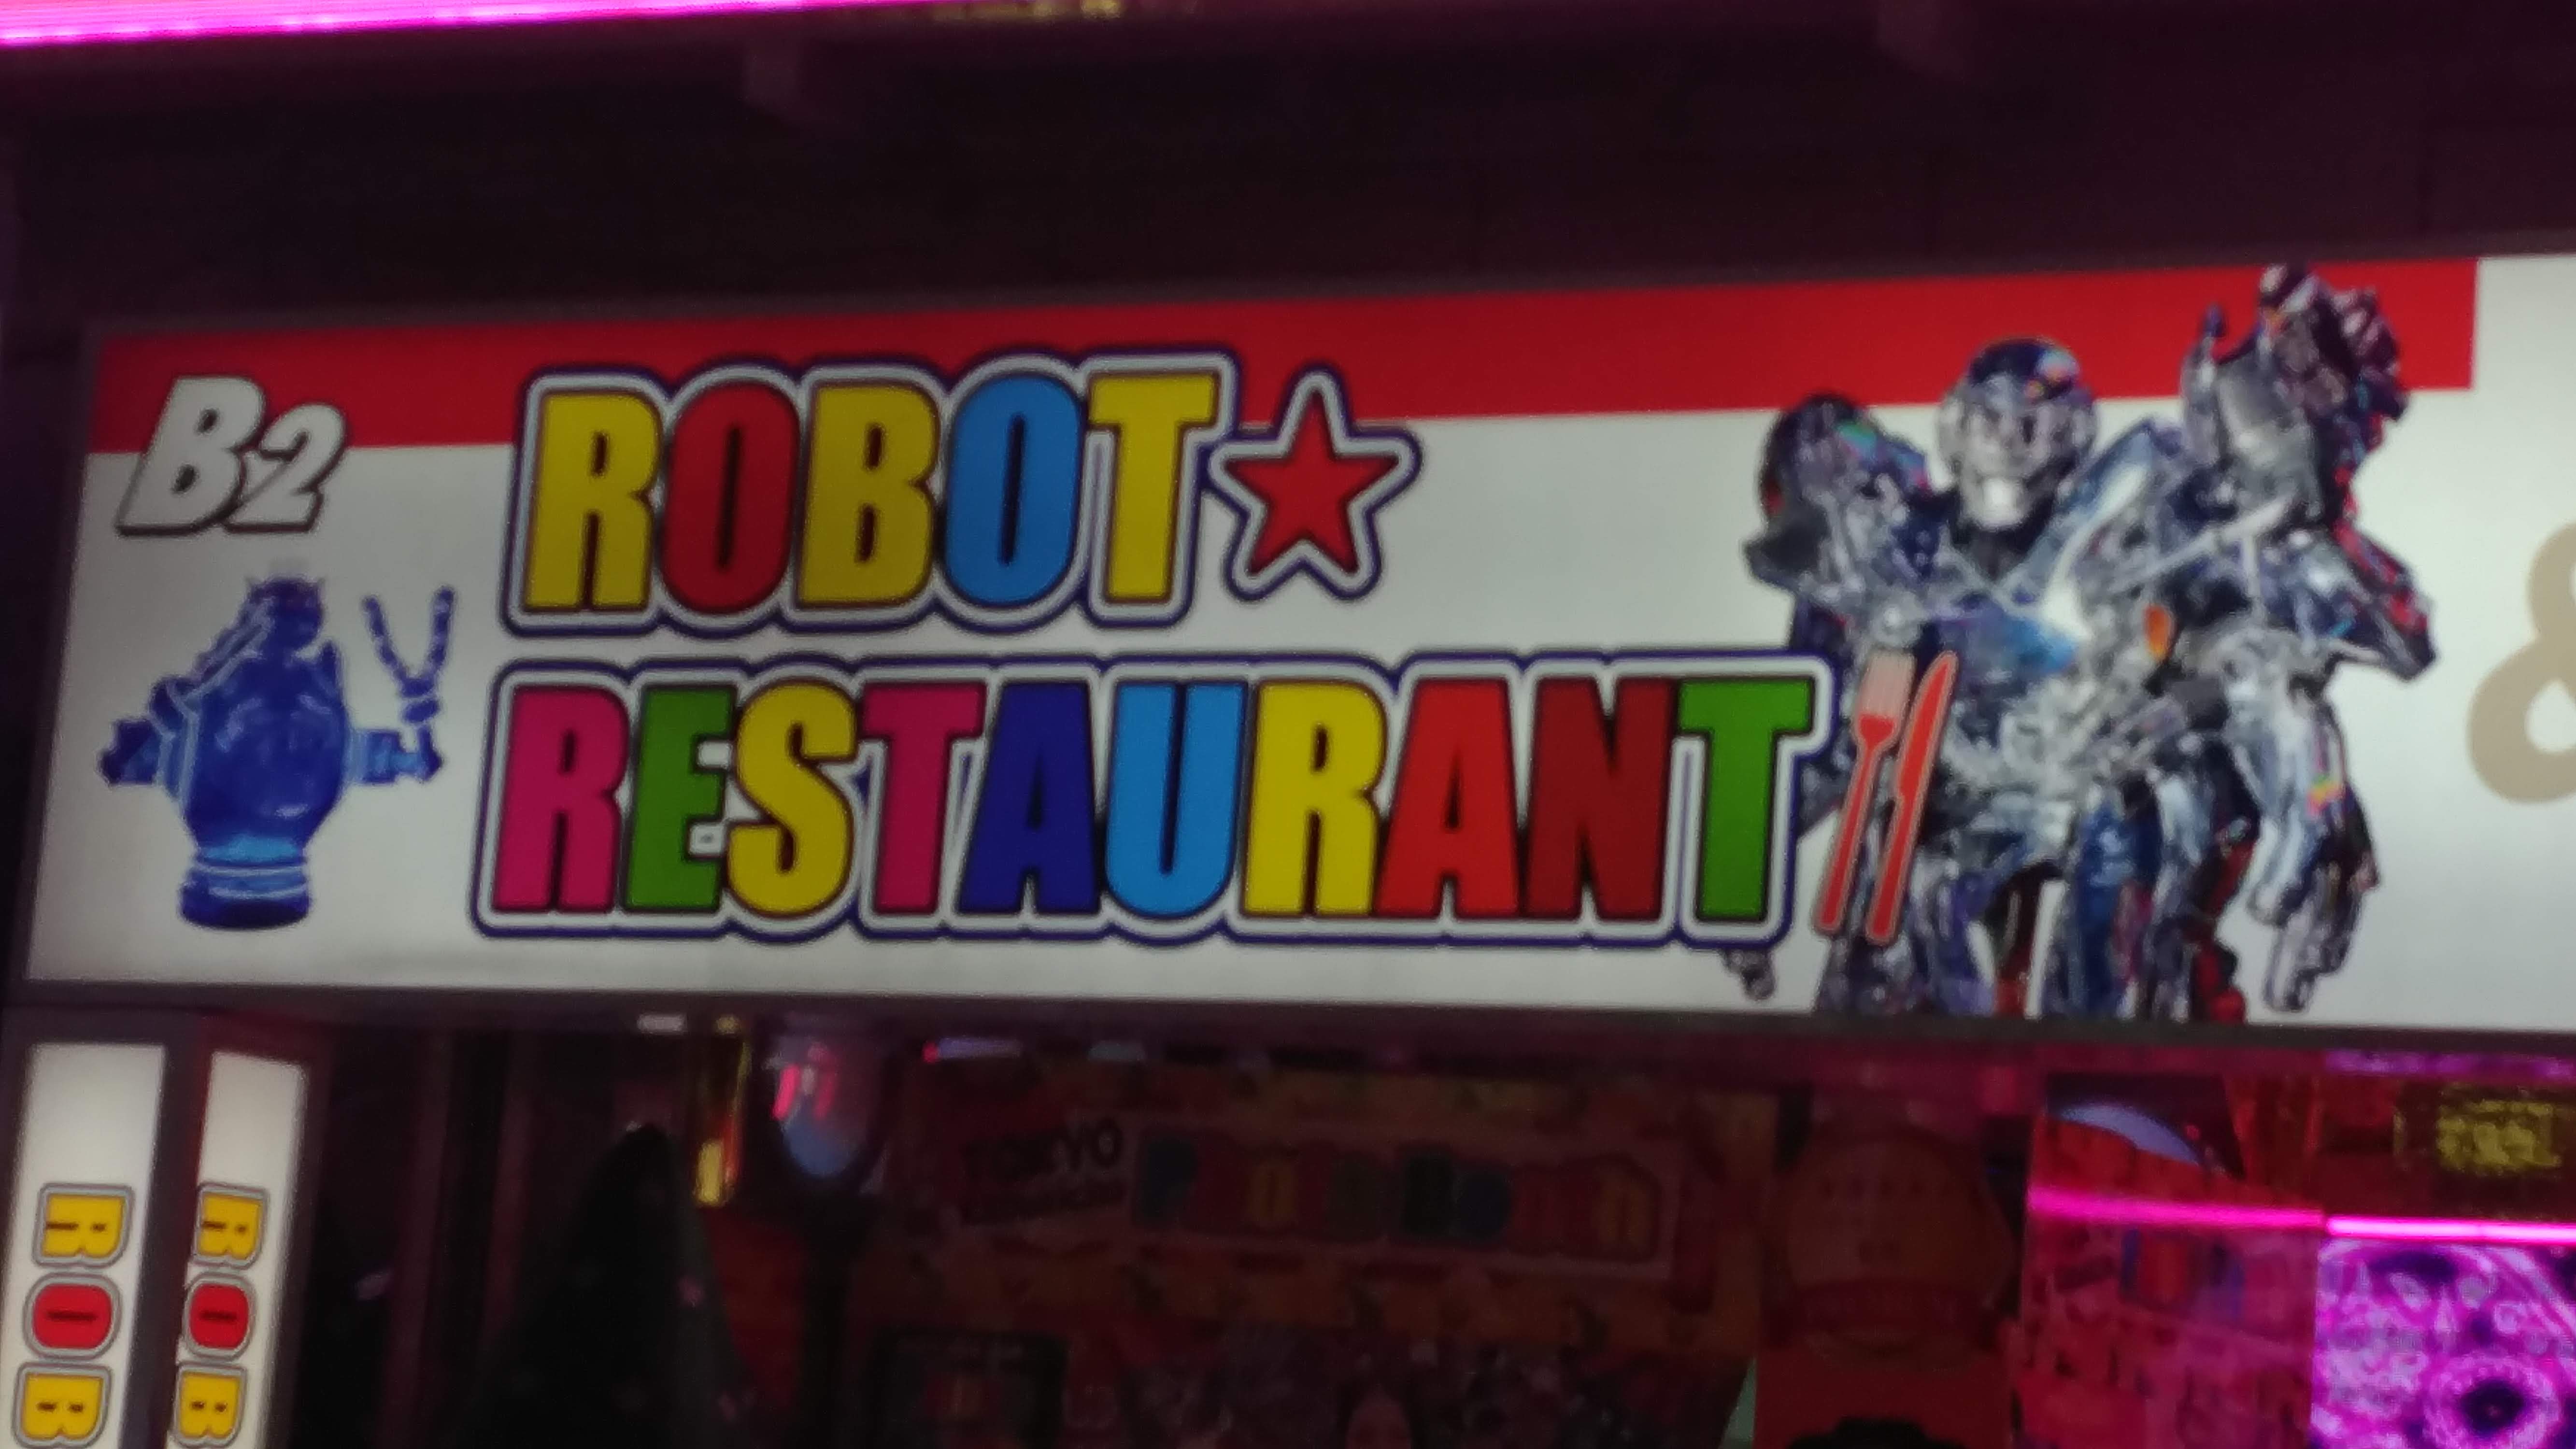 robot restaurant sign in colourful lettering